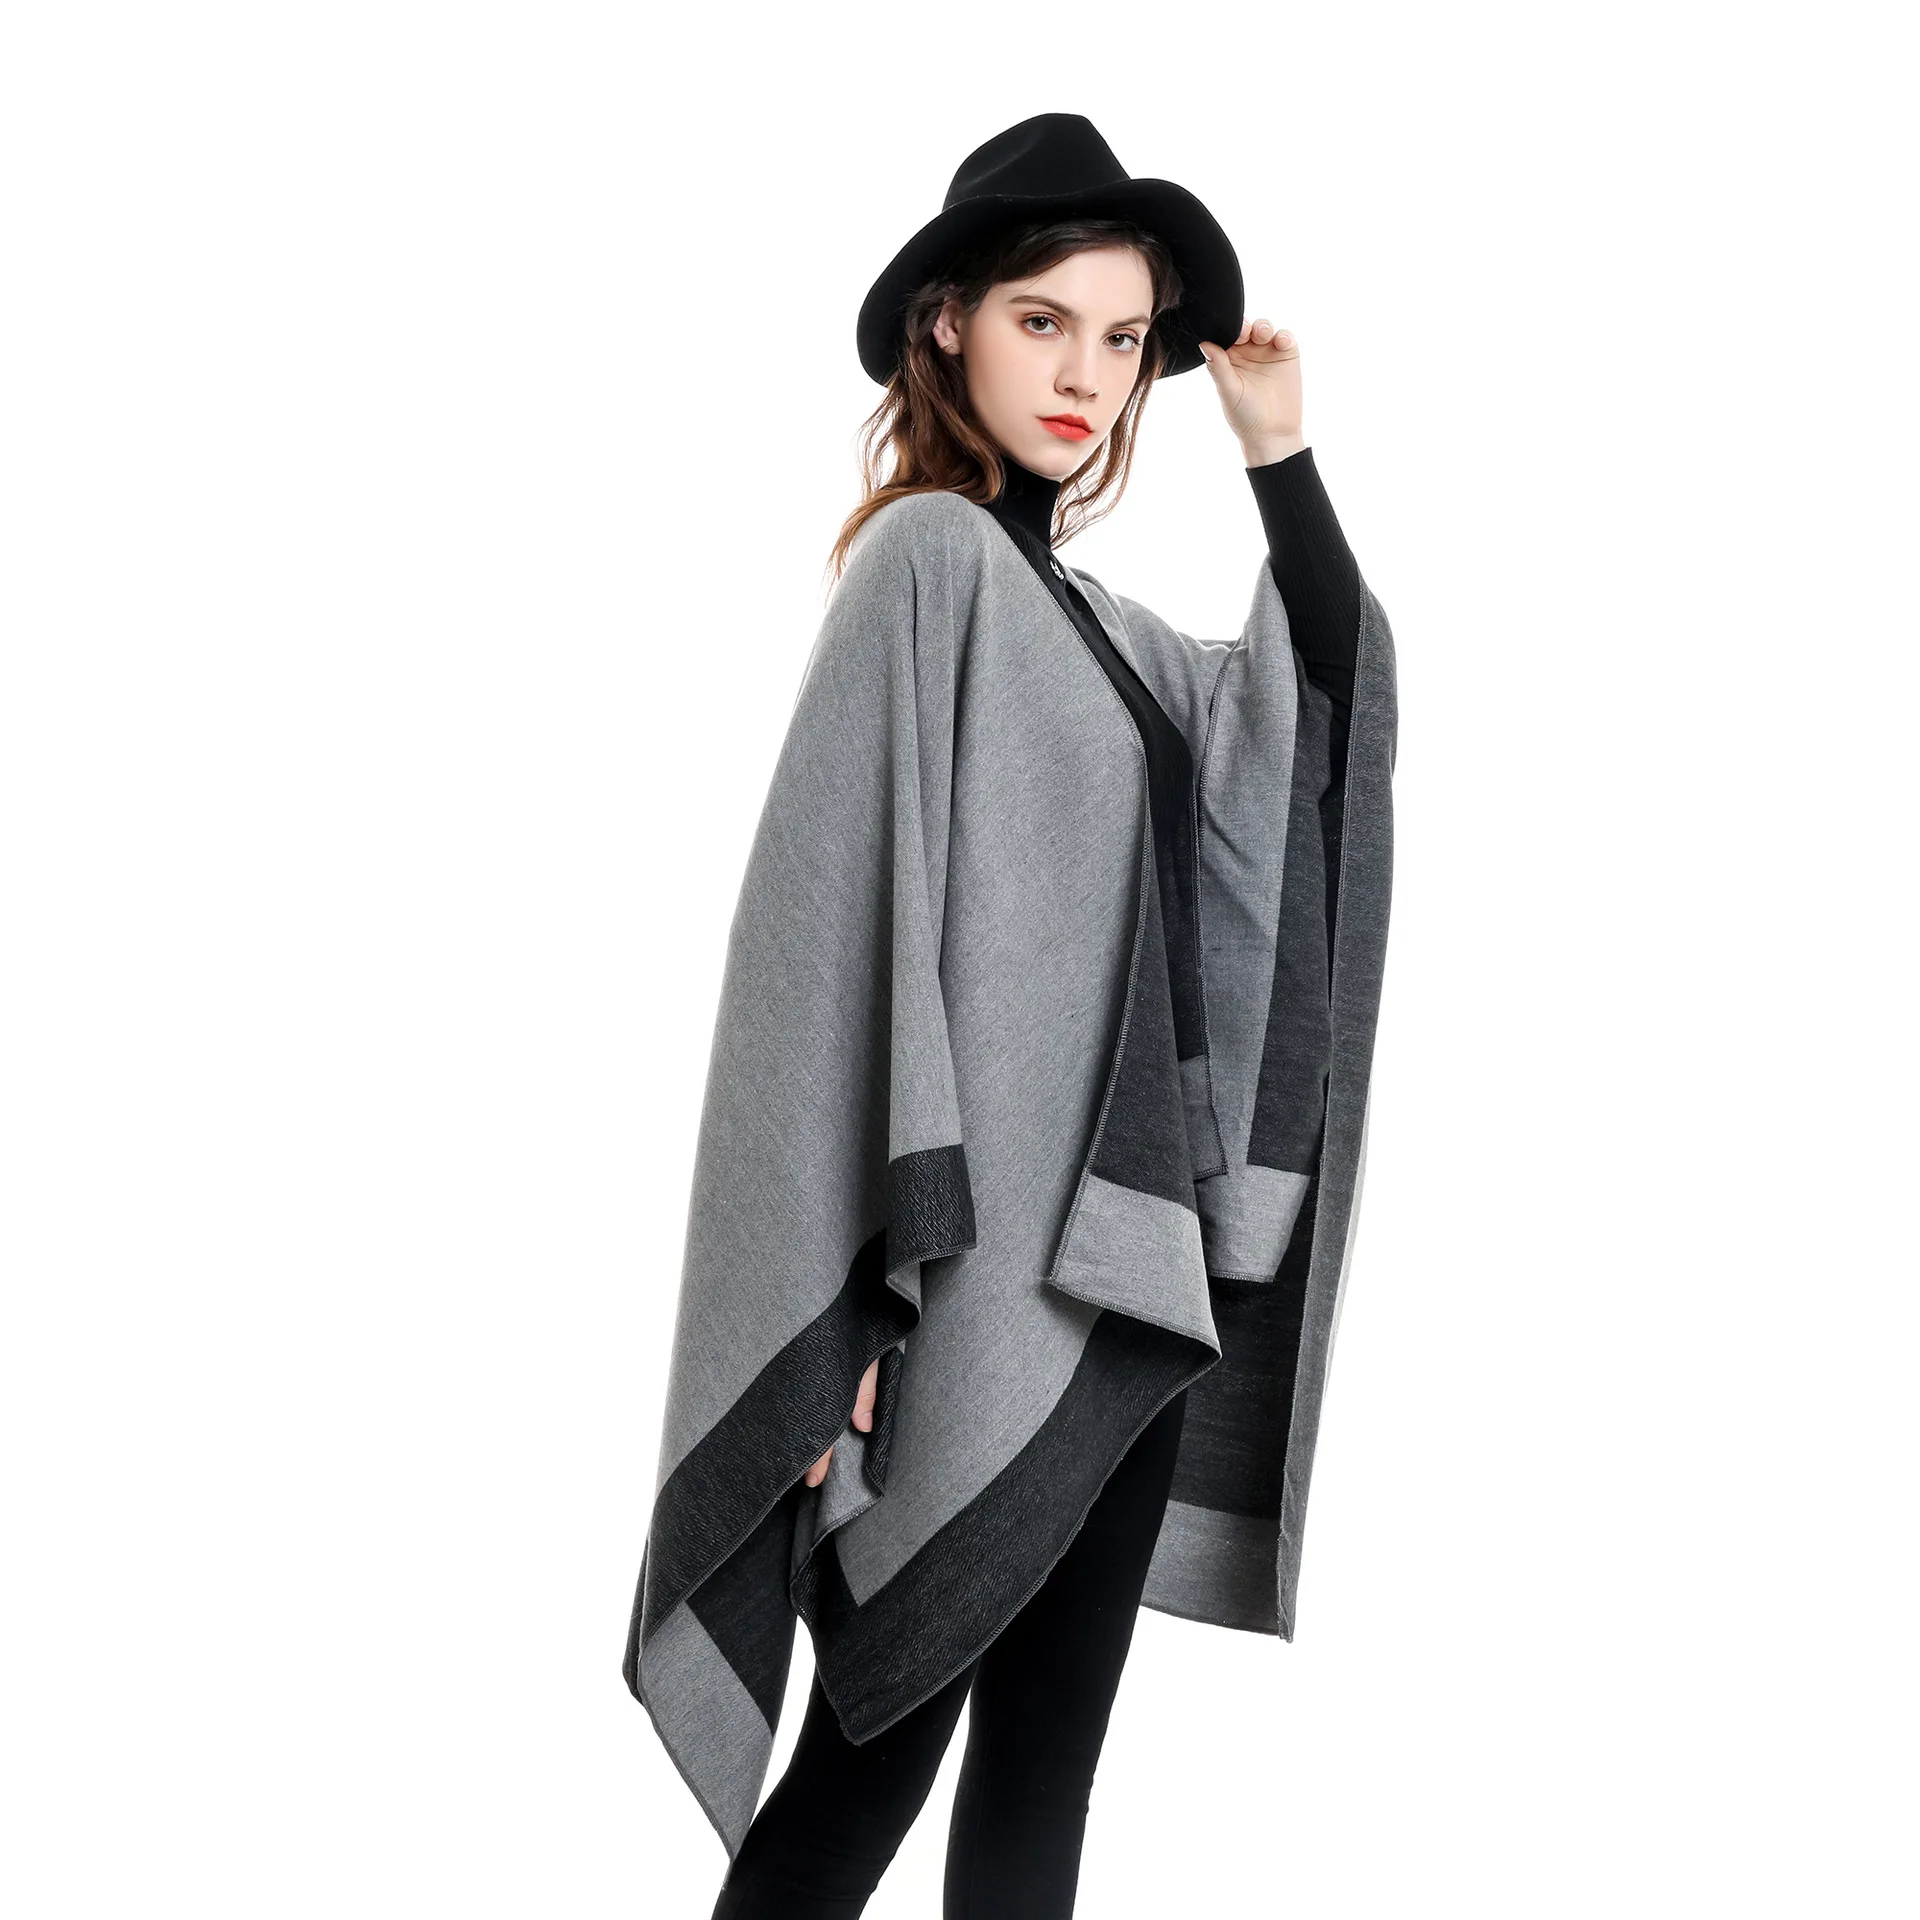 2022 Spring  Autumn Solid Color European  American Travel Shopping New Women's Warm Big Shawl Sunscreen Gray Cloak Scarf travel bag eastpak station m 363 sunday gray